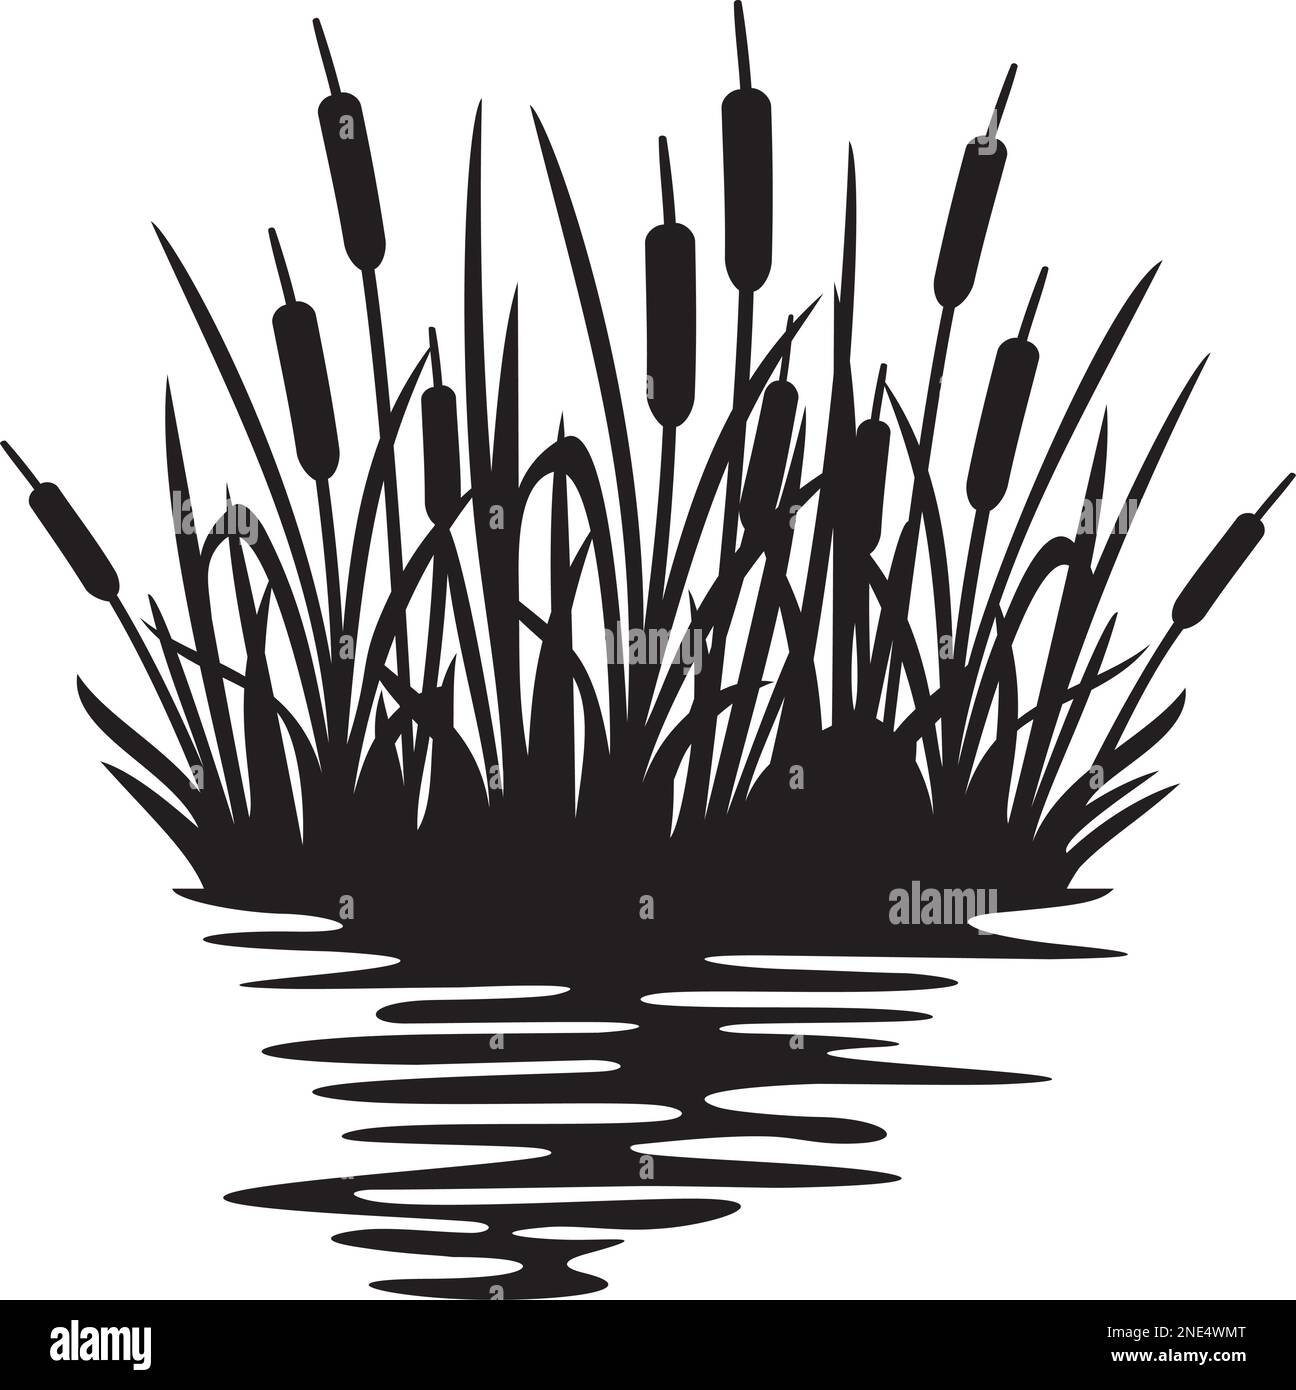 Reeds silhouette design reflecting over the lake or river. Illustration of bulrush and grass or river. Stock Vector